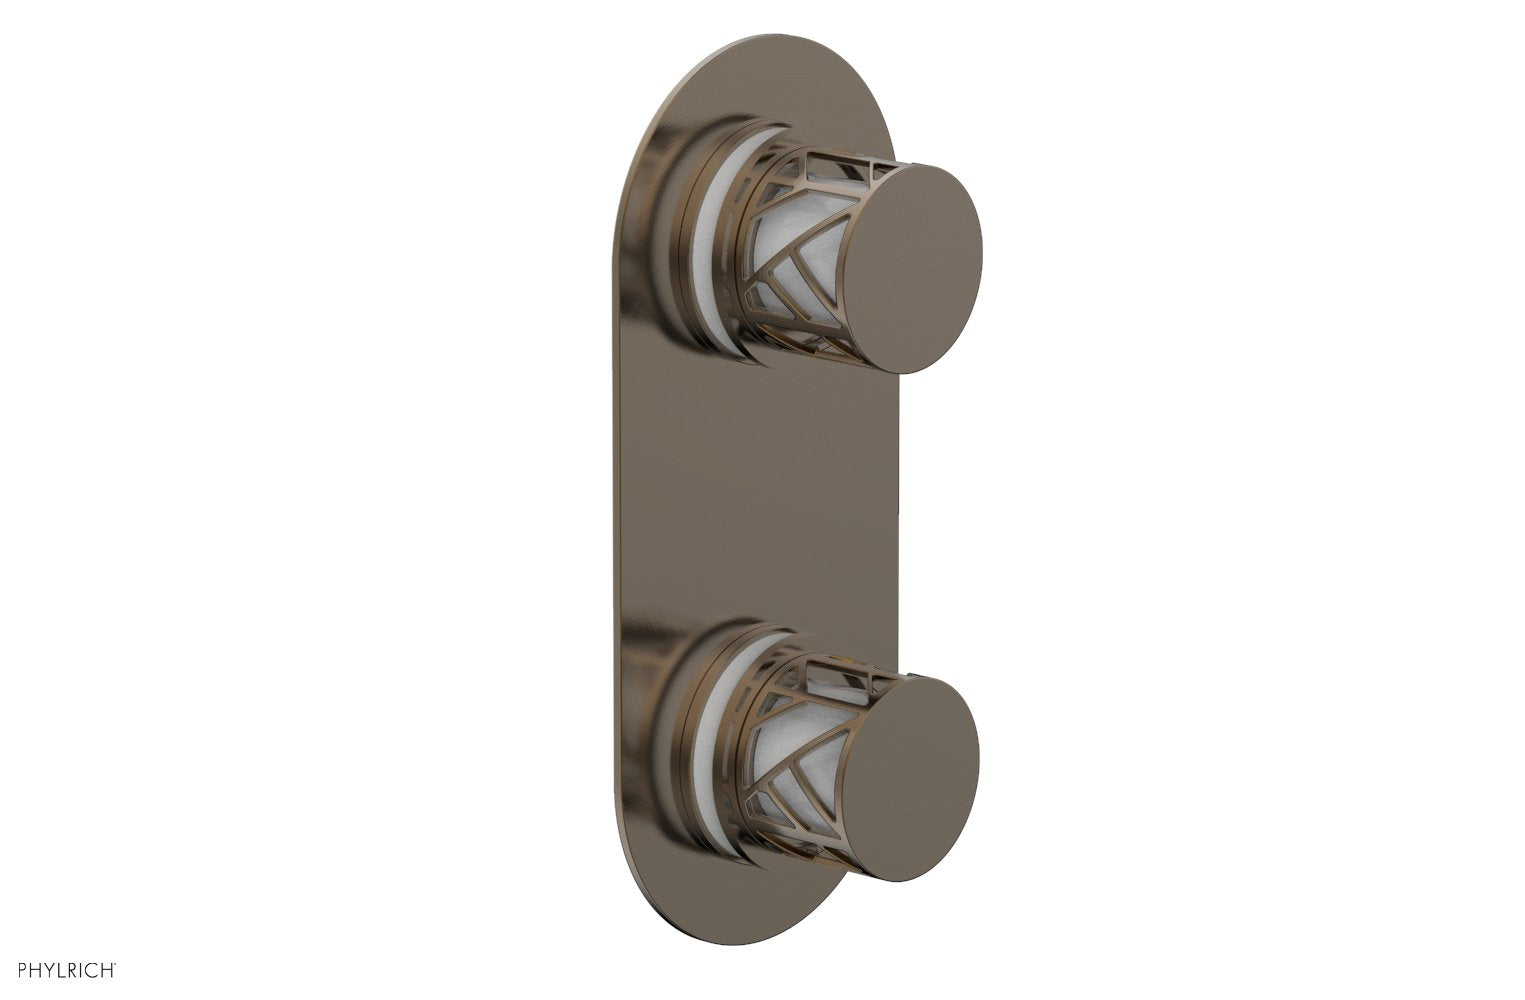 Phylrich JOLIE Thermostatic Valve with Volume Control or Diverter with "White" Accents